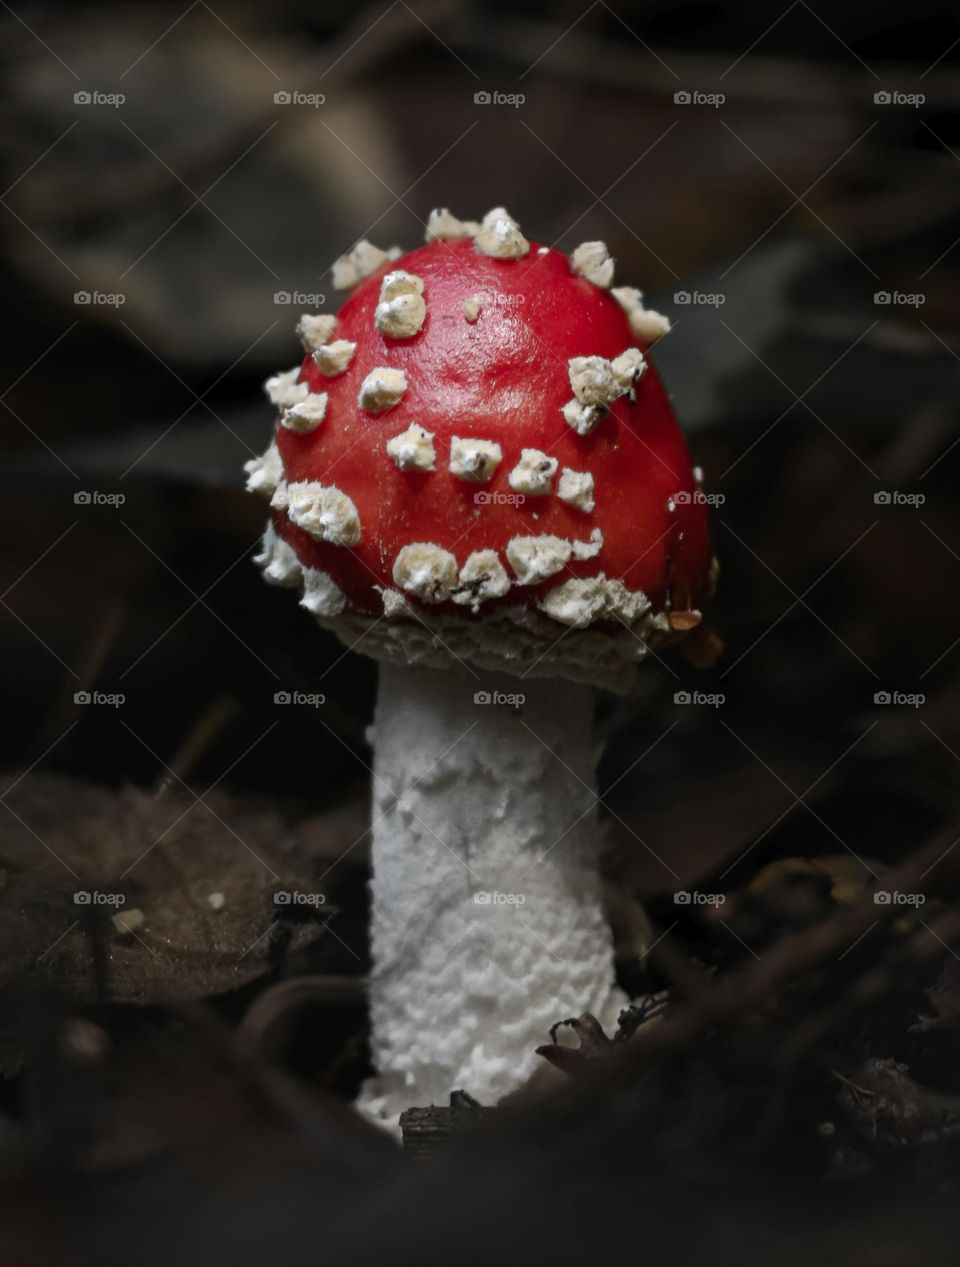 In the dark undergrowth of the forest a tiny fly agaric mushroom pops it’s red cap up from the leaf litter